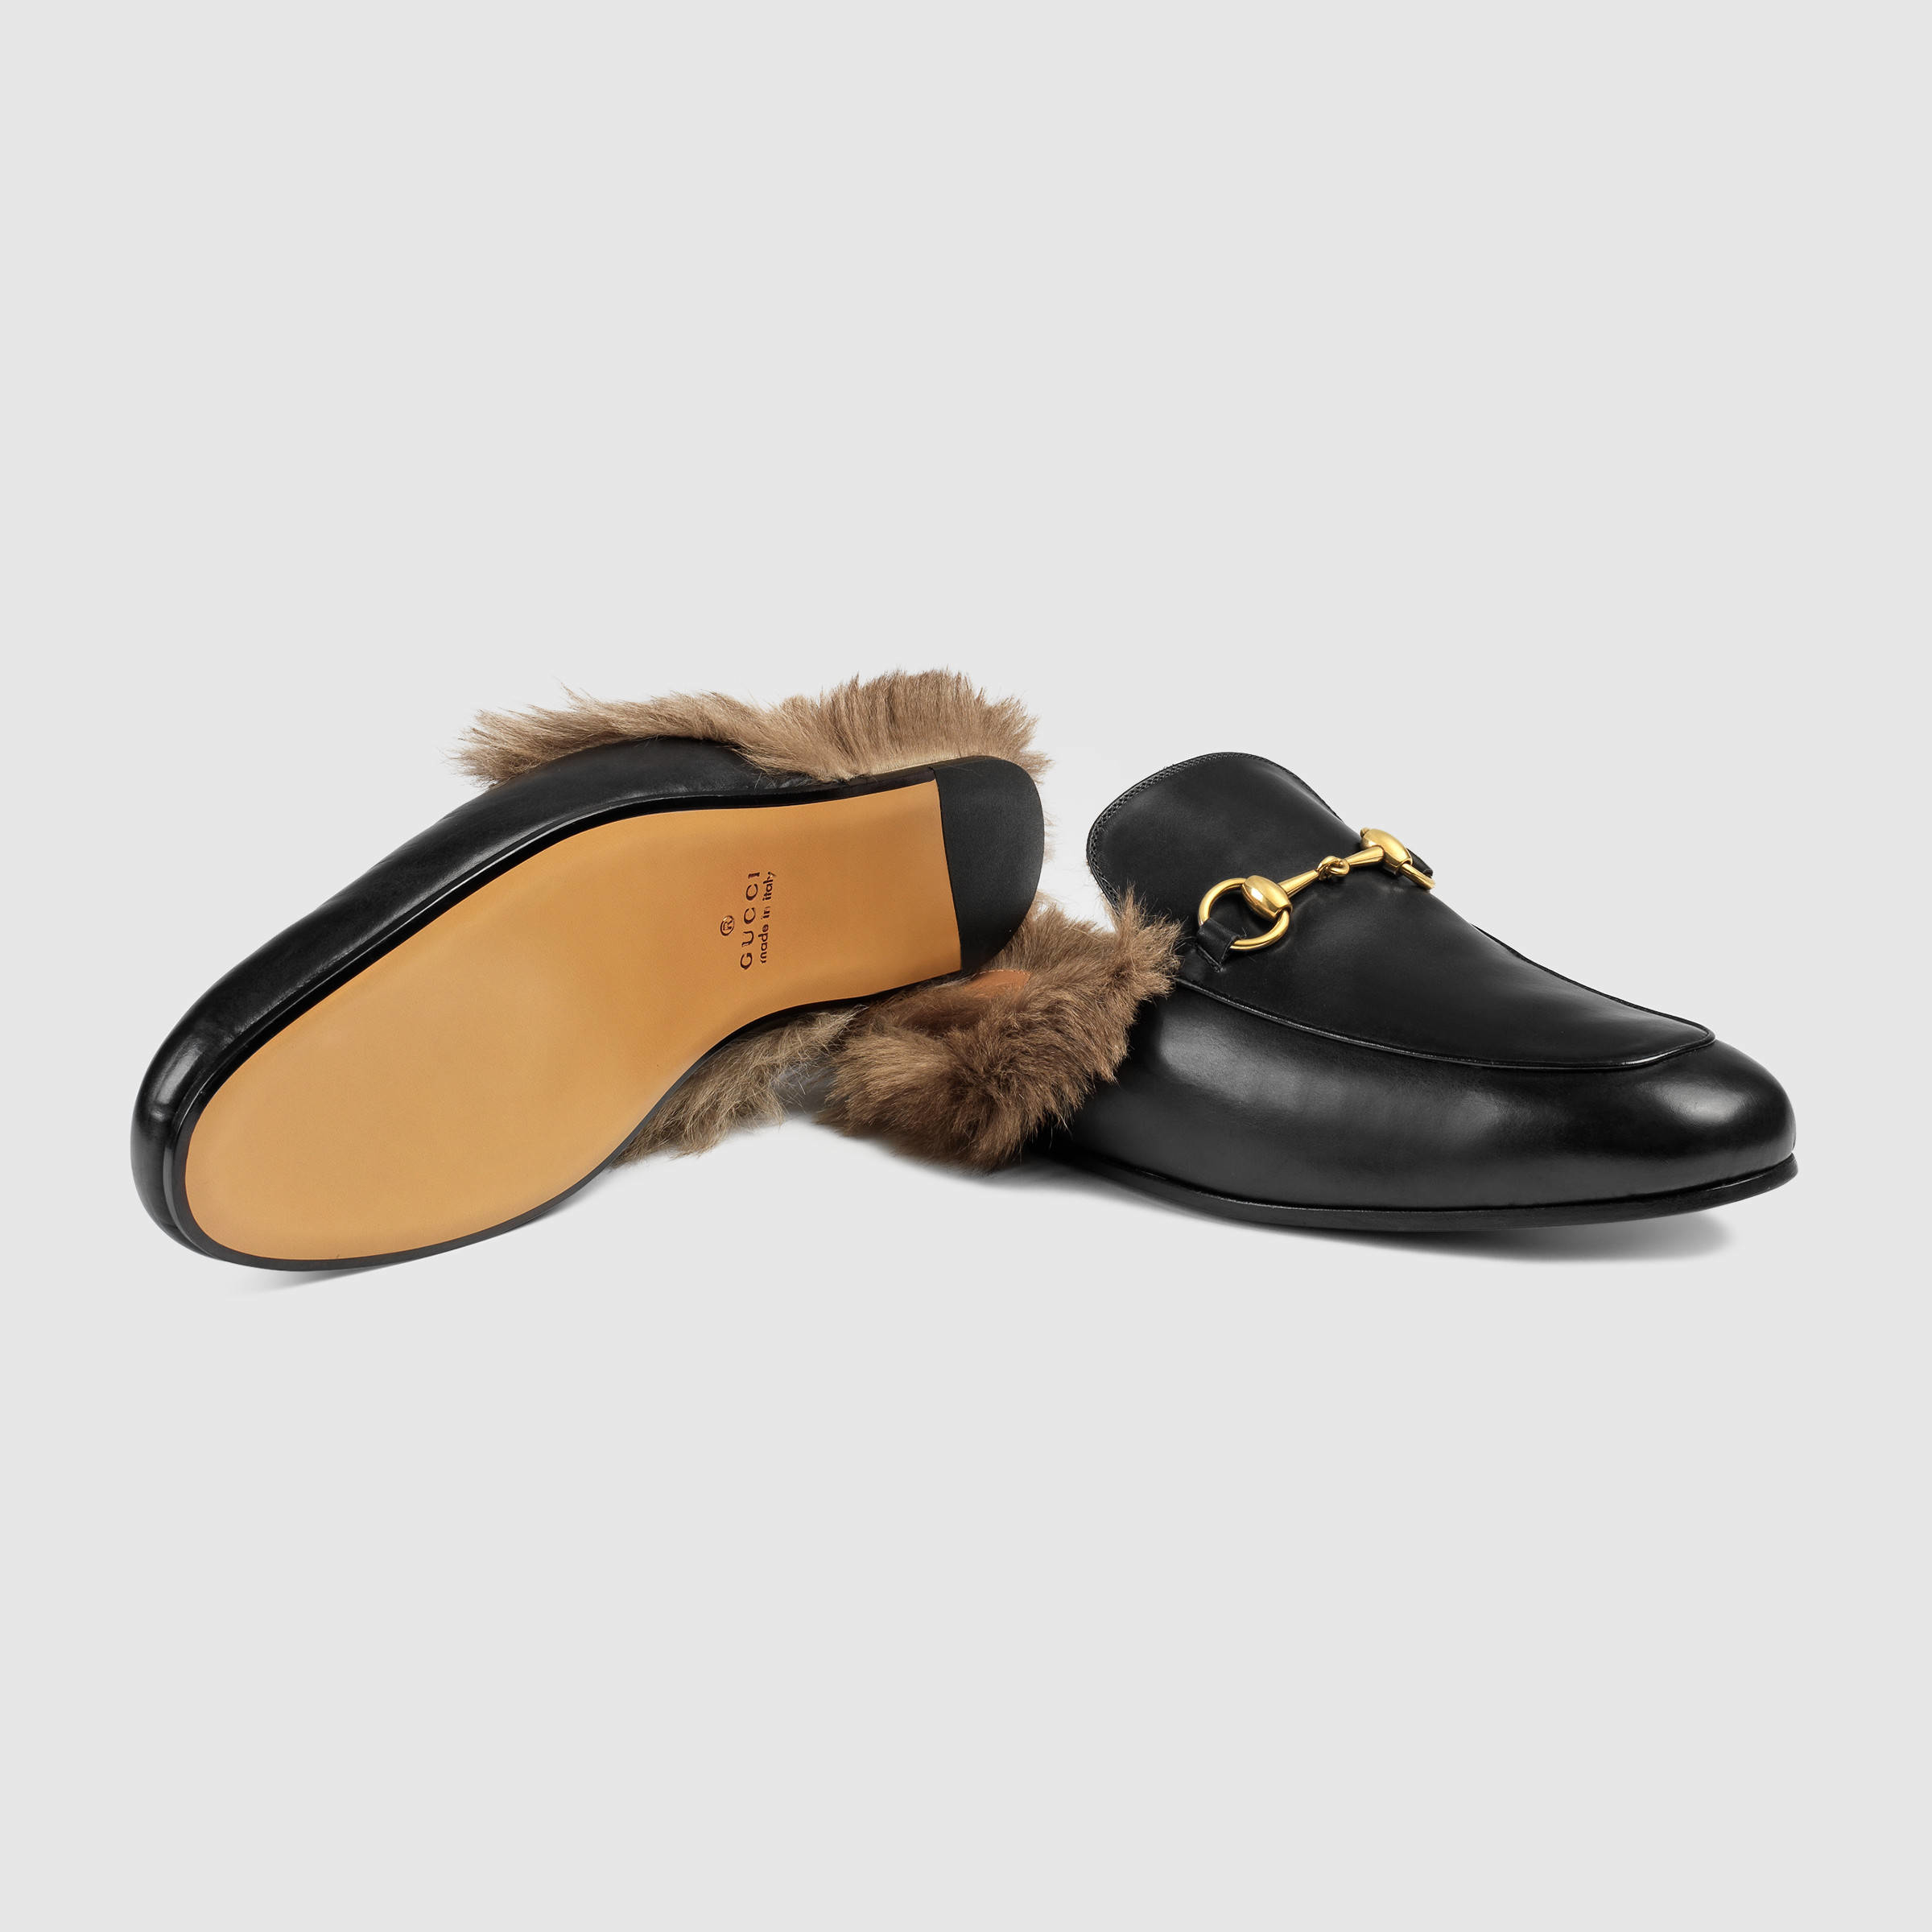 Gucci Princetown Leather Slipper in Black for Men - Lyst